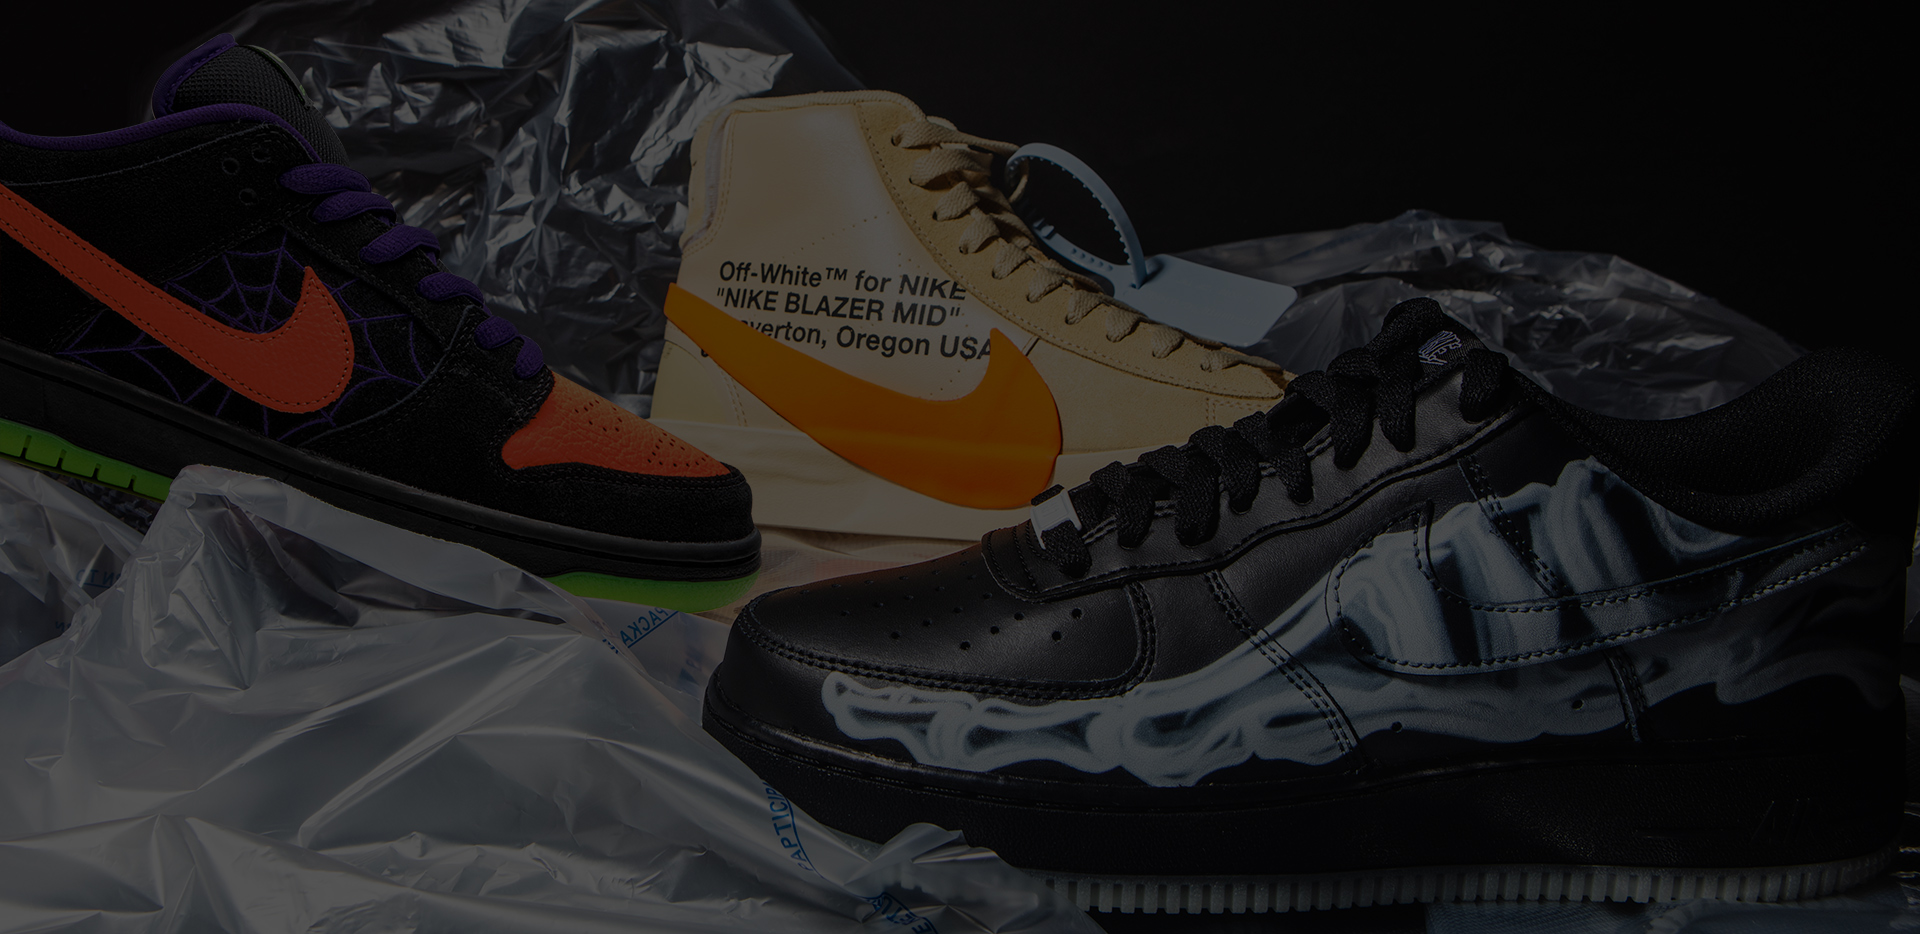 The Definitive HALLOWEEN-THEMED SNEAKER Shopping Guide